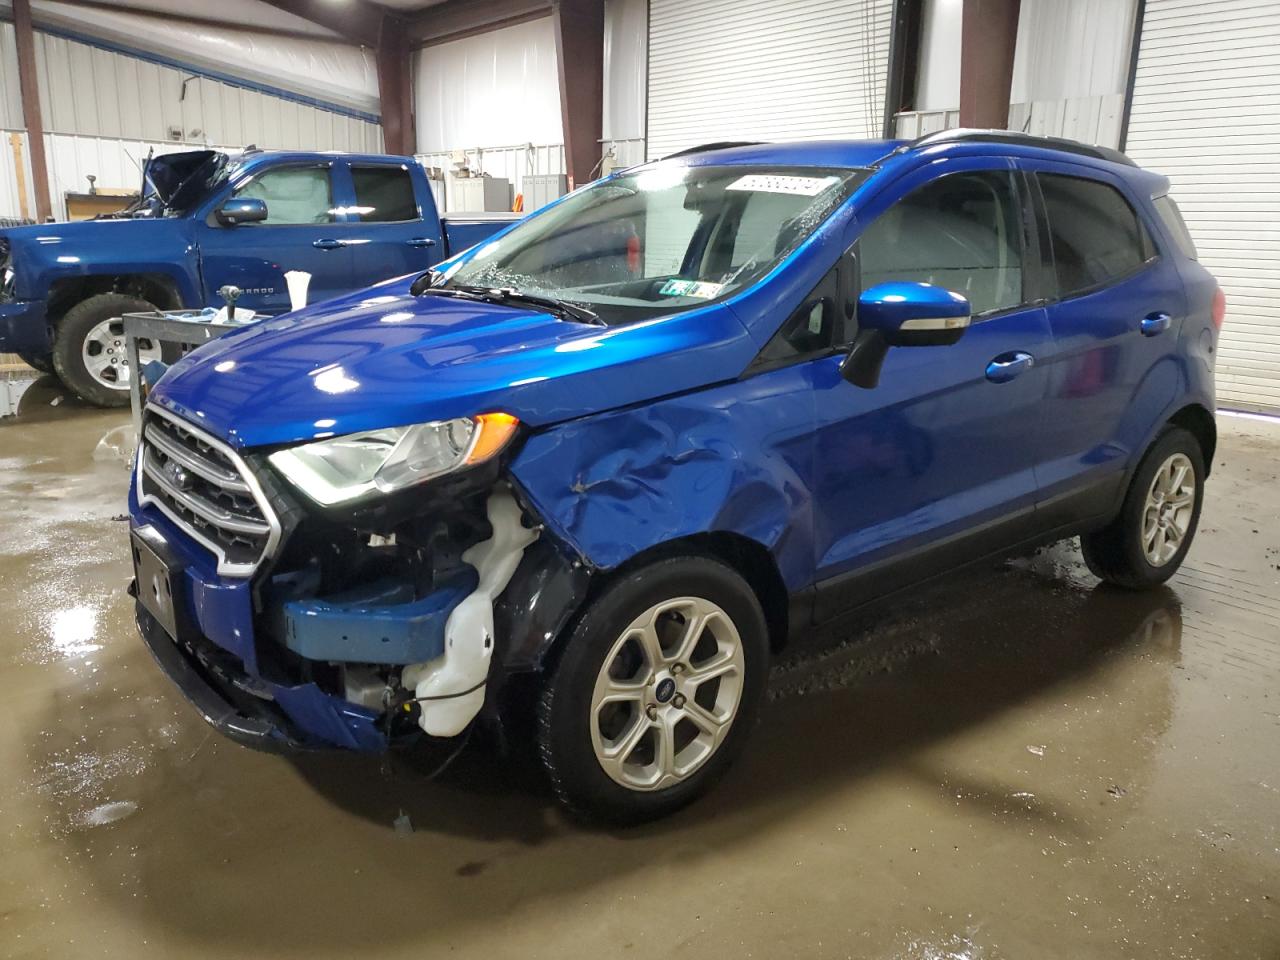 vin: MAJ3S2GE2KC269905 MAJ3S2GE2KC269905 2019 ford ecosport 1000 for Sale in 15122 3431, Pa - Pittsburgh West, West Mifflin, Pennsylvania, USA